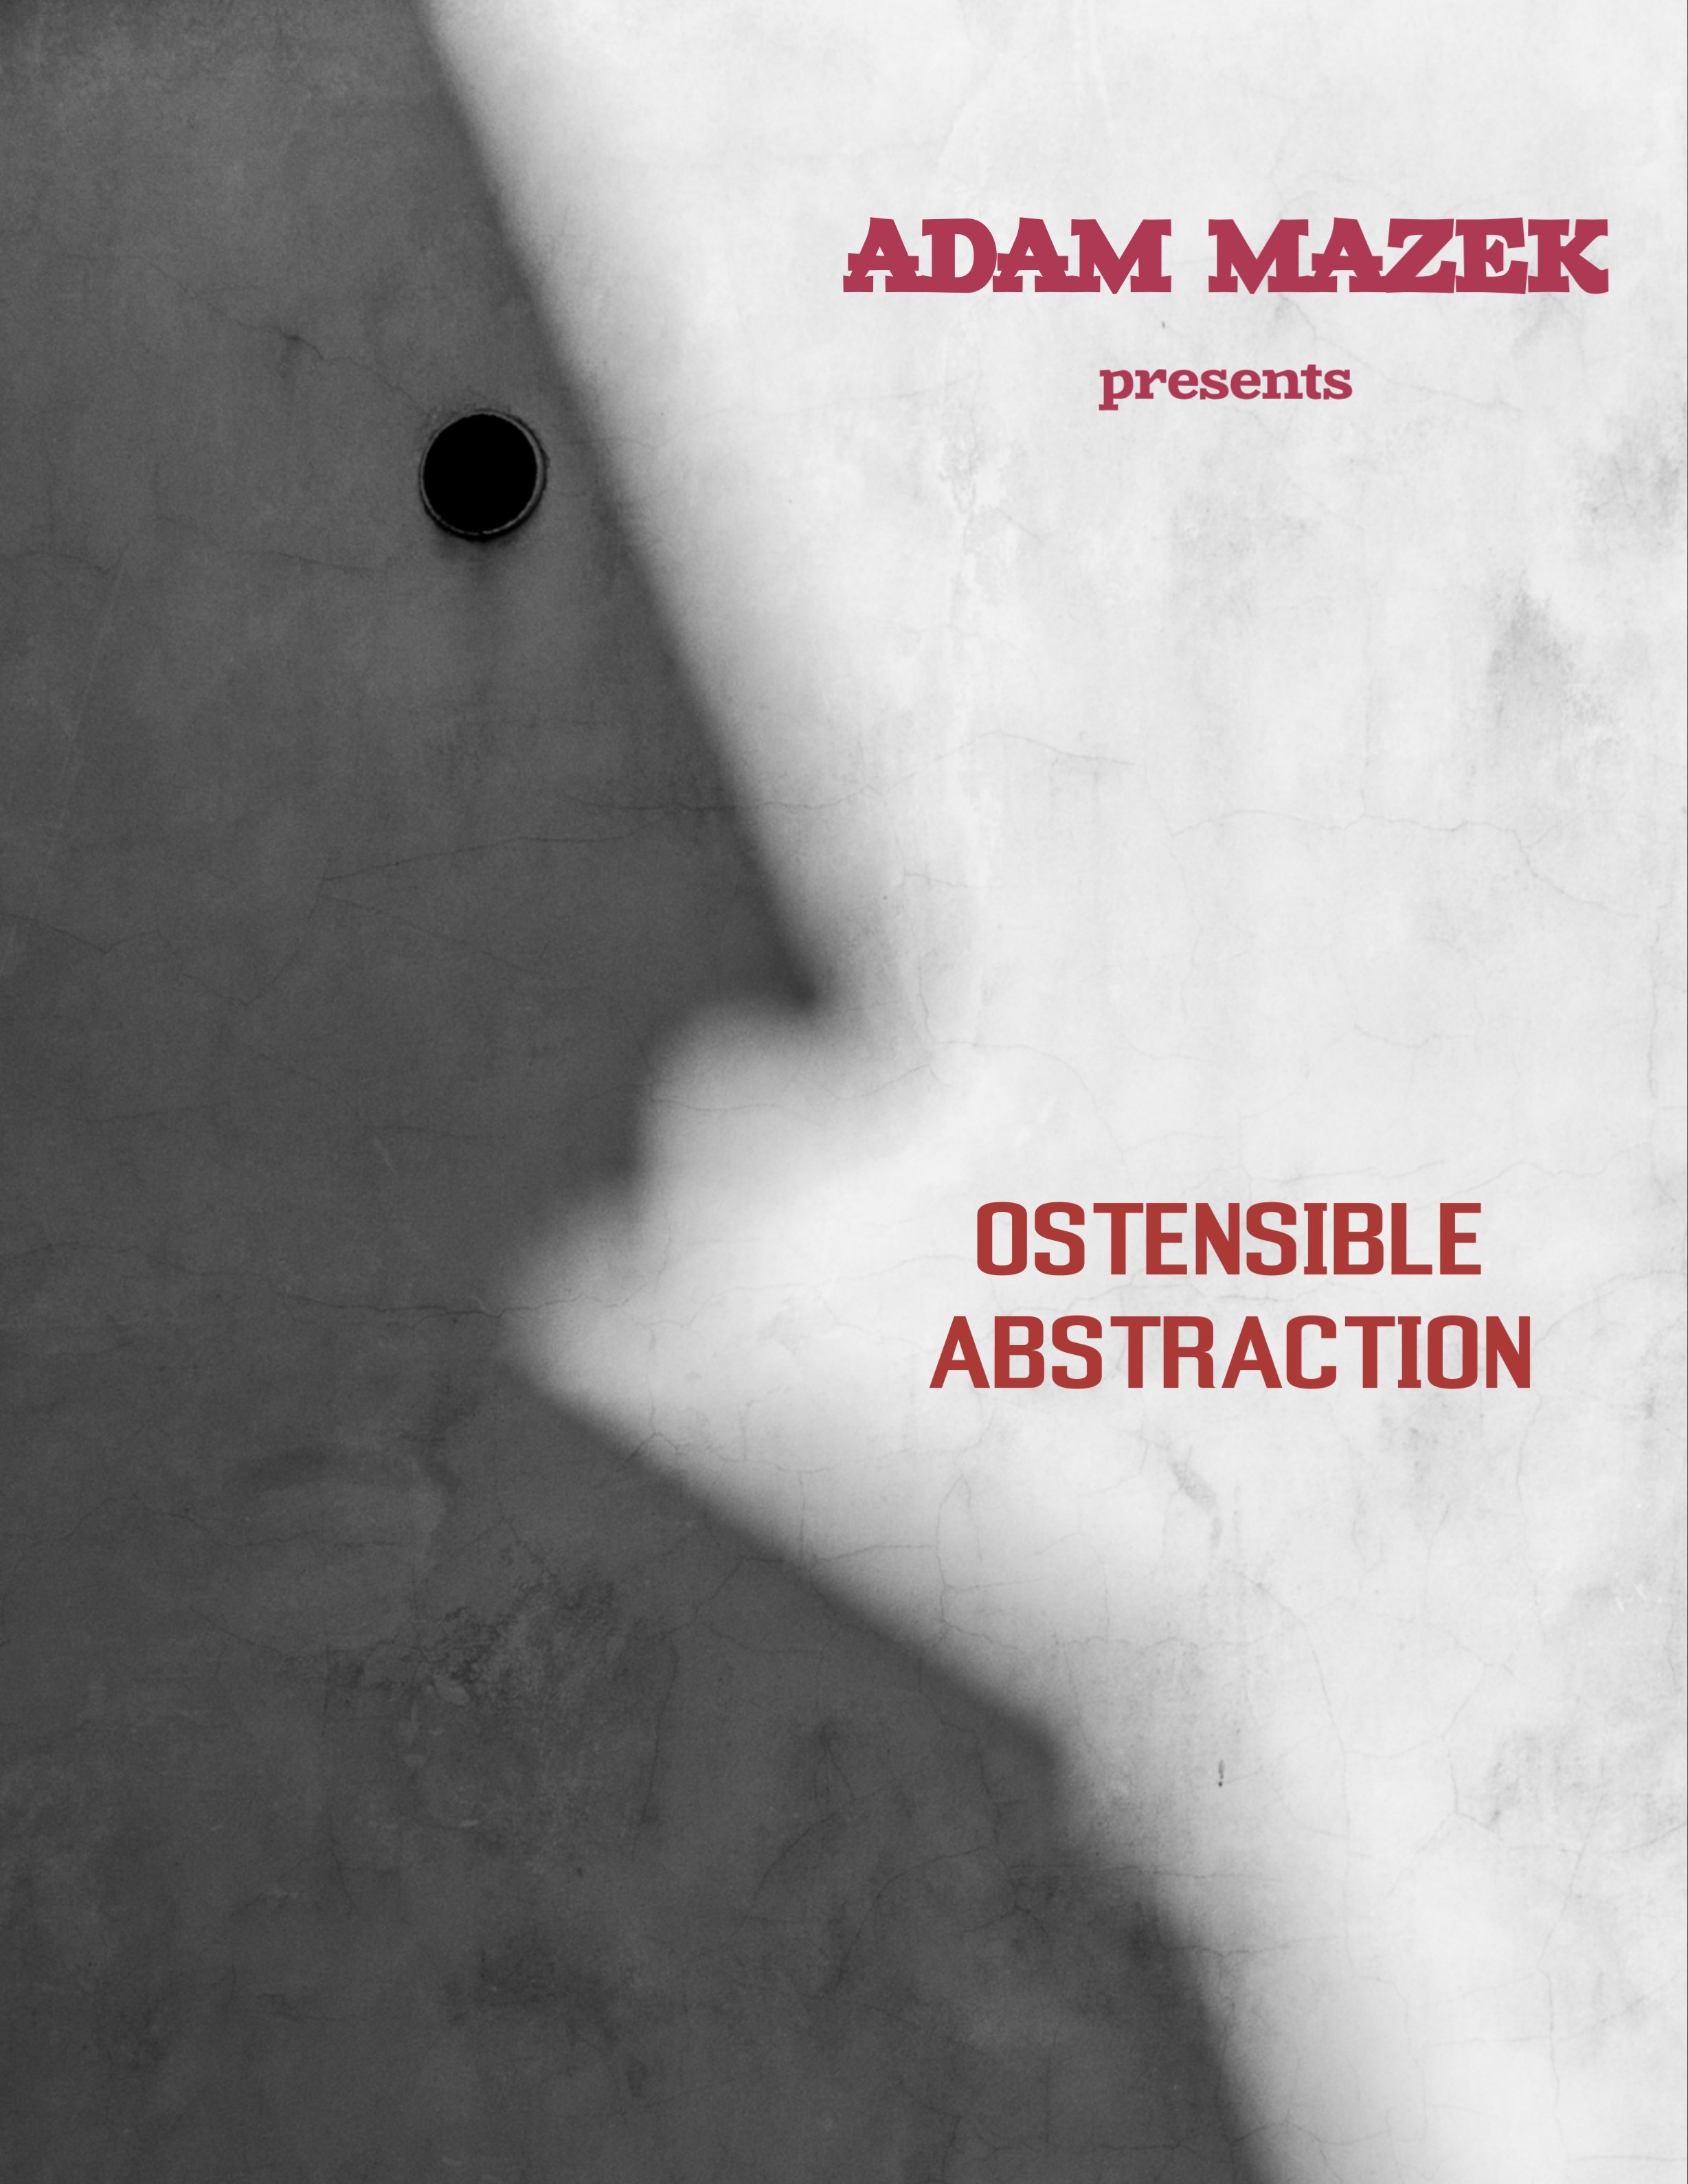 Adam Mazek Photography 2019. Post: "Ostensible abstraction" Mini e-book. Poster.